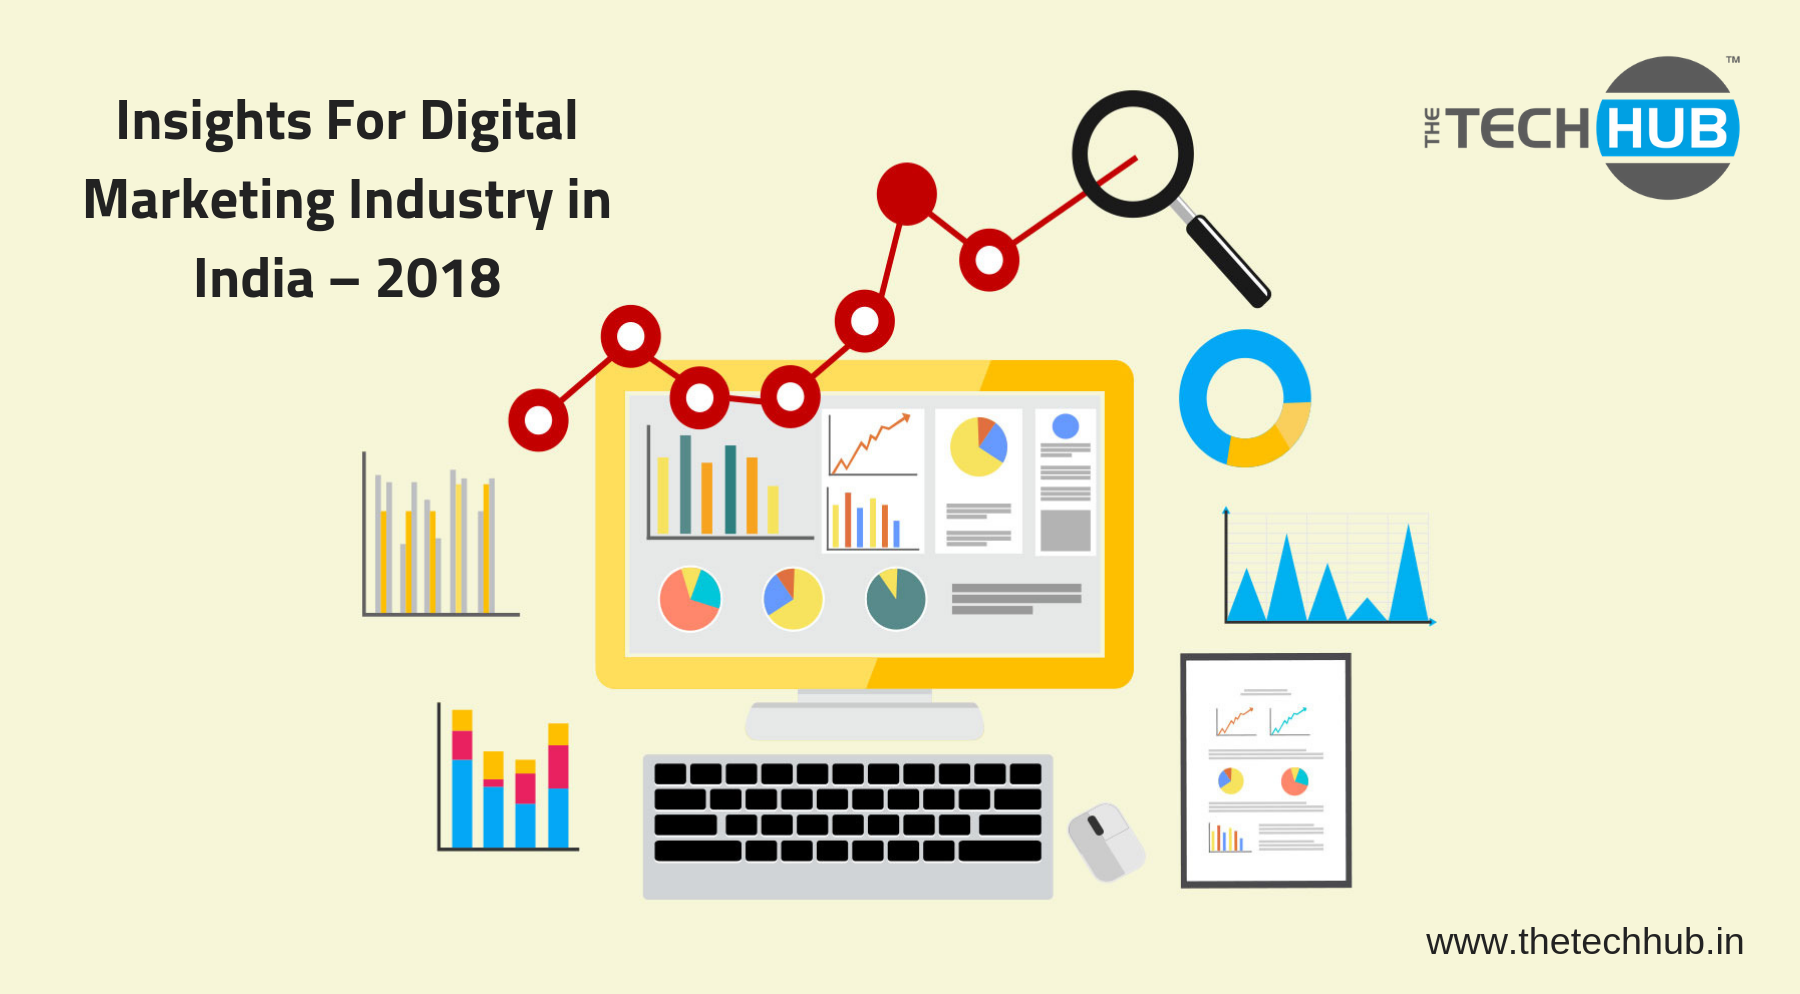 Insights For Digital marketing industry in India – 2018